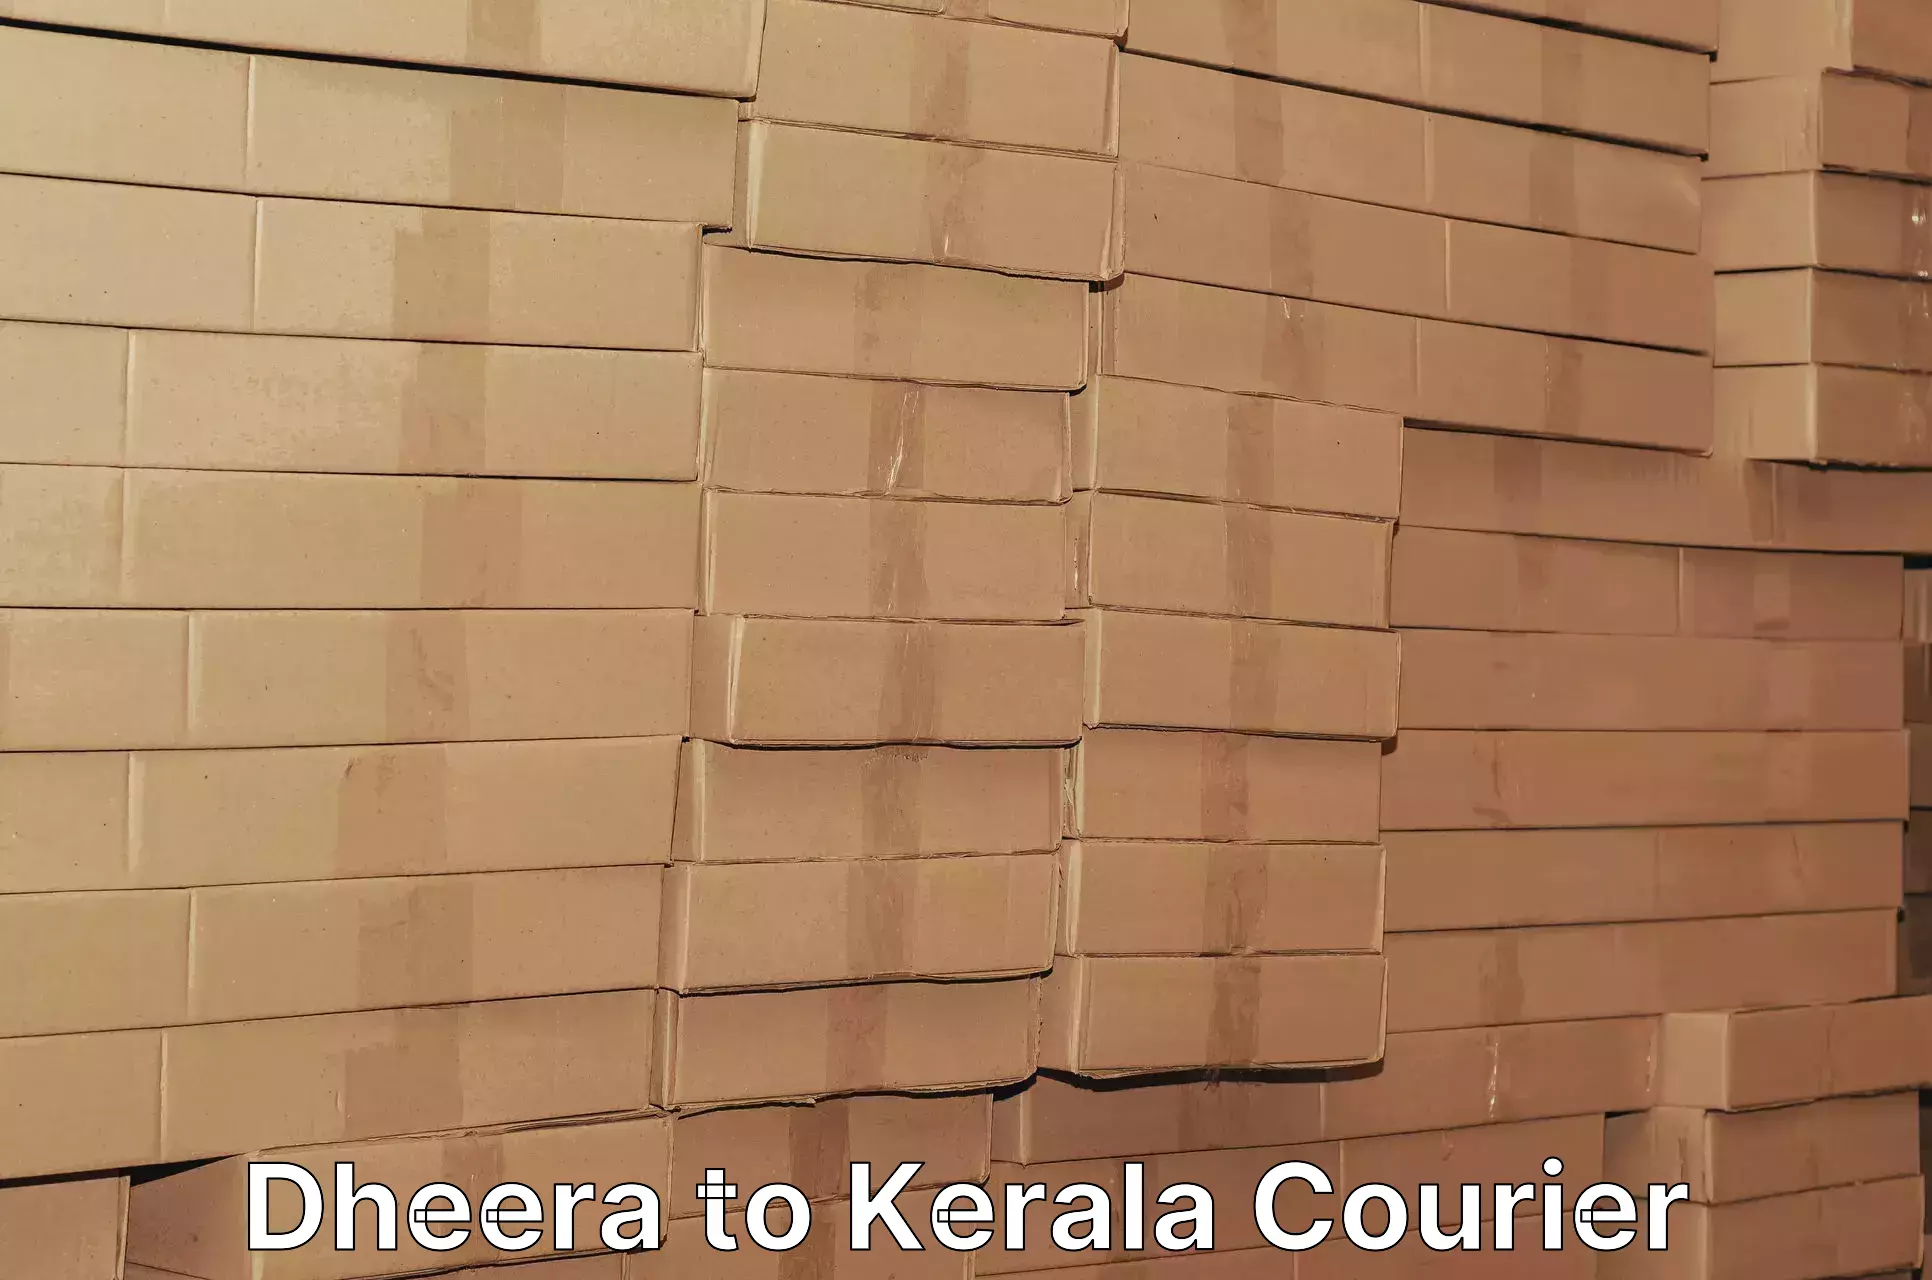 Same-day delivery options Dheera to Kerala